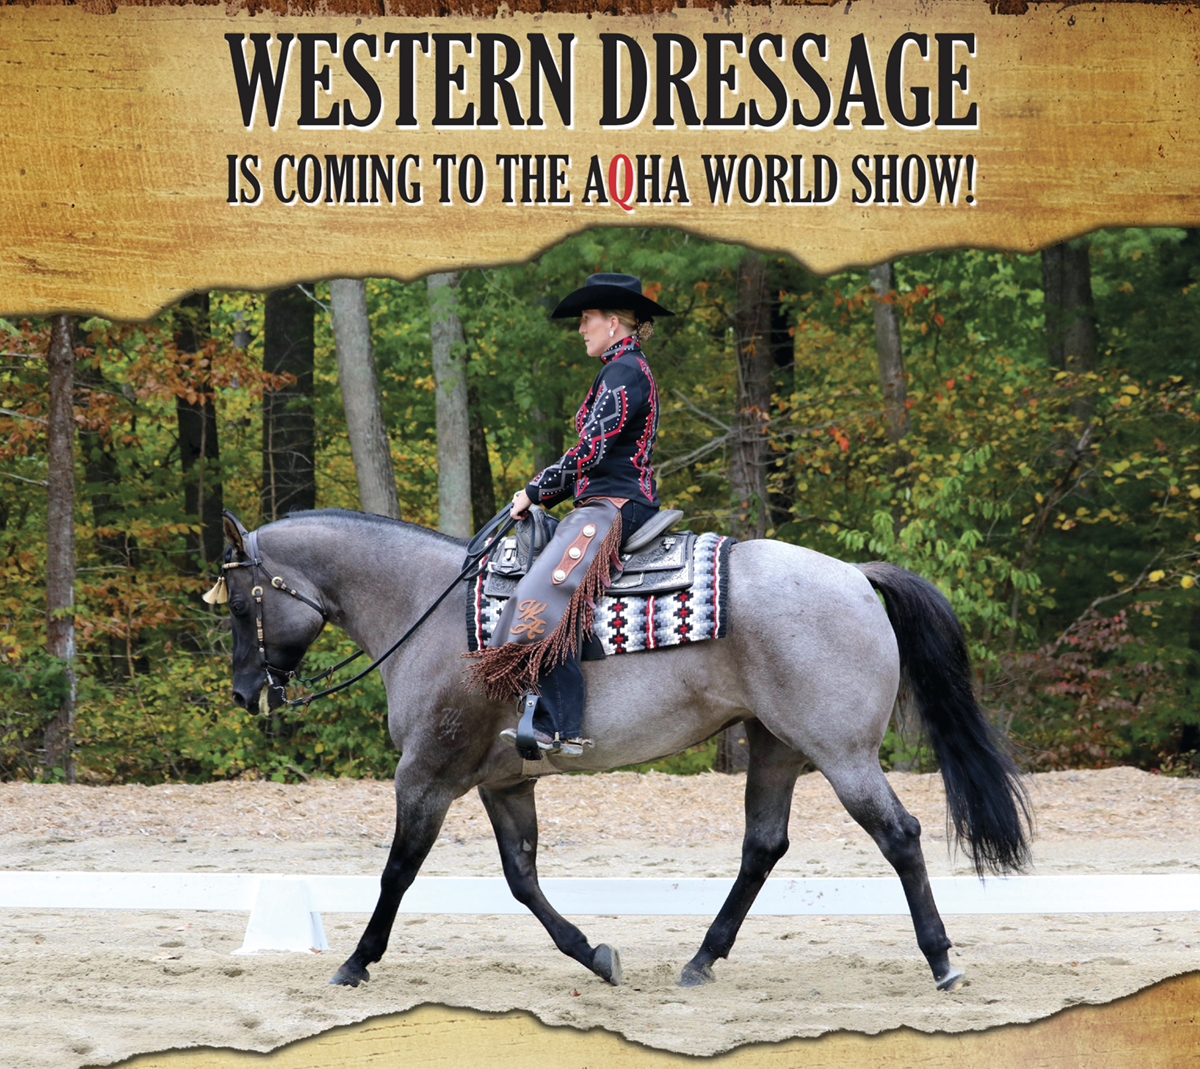 Western Dressage Coming to AQHA World Show